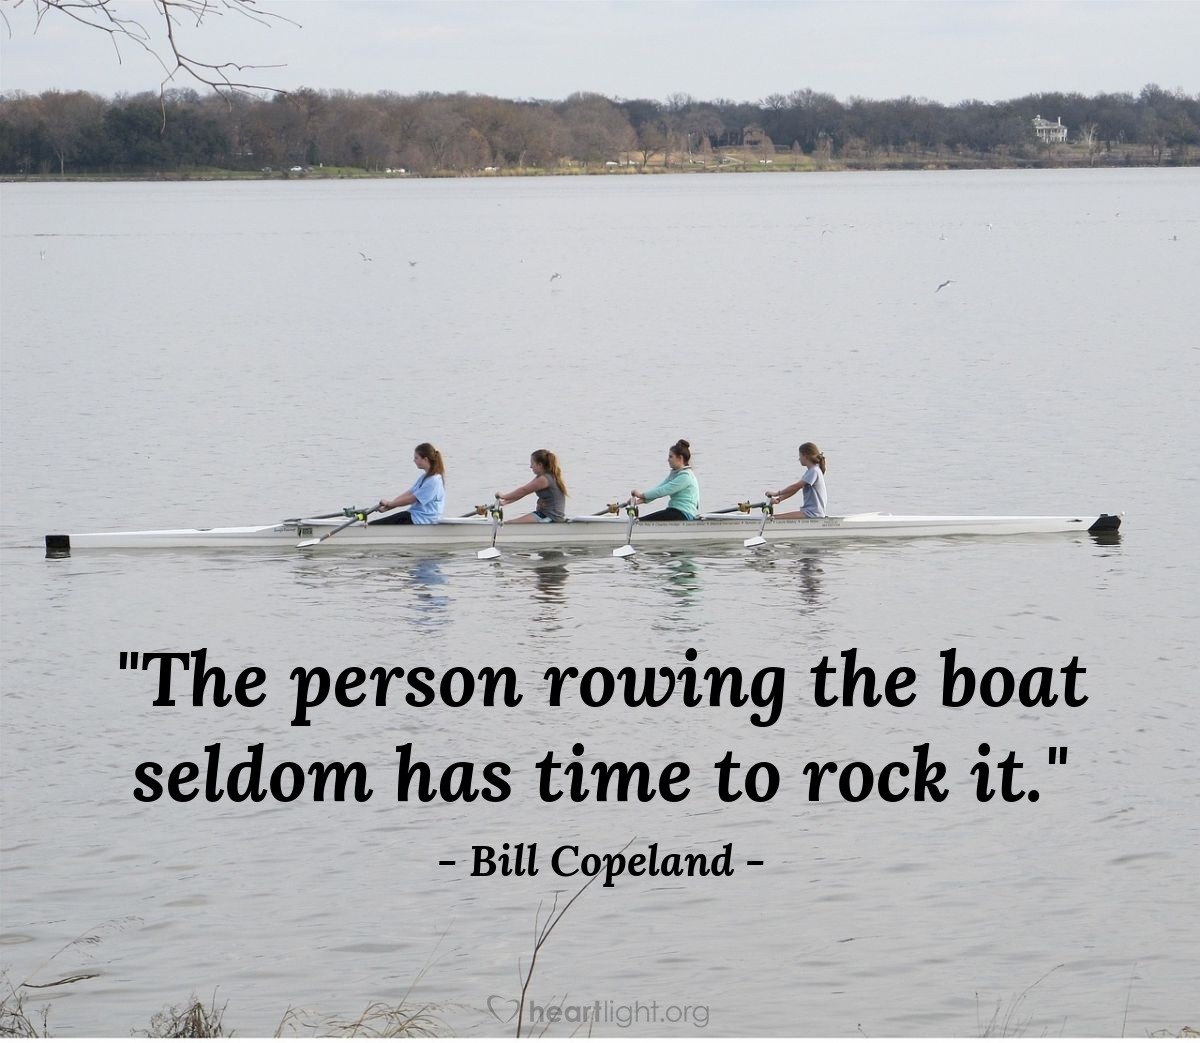 Illustration of Bill Copeland — "The person rowing the boat seldom has time to rock it."